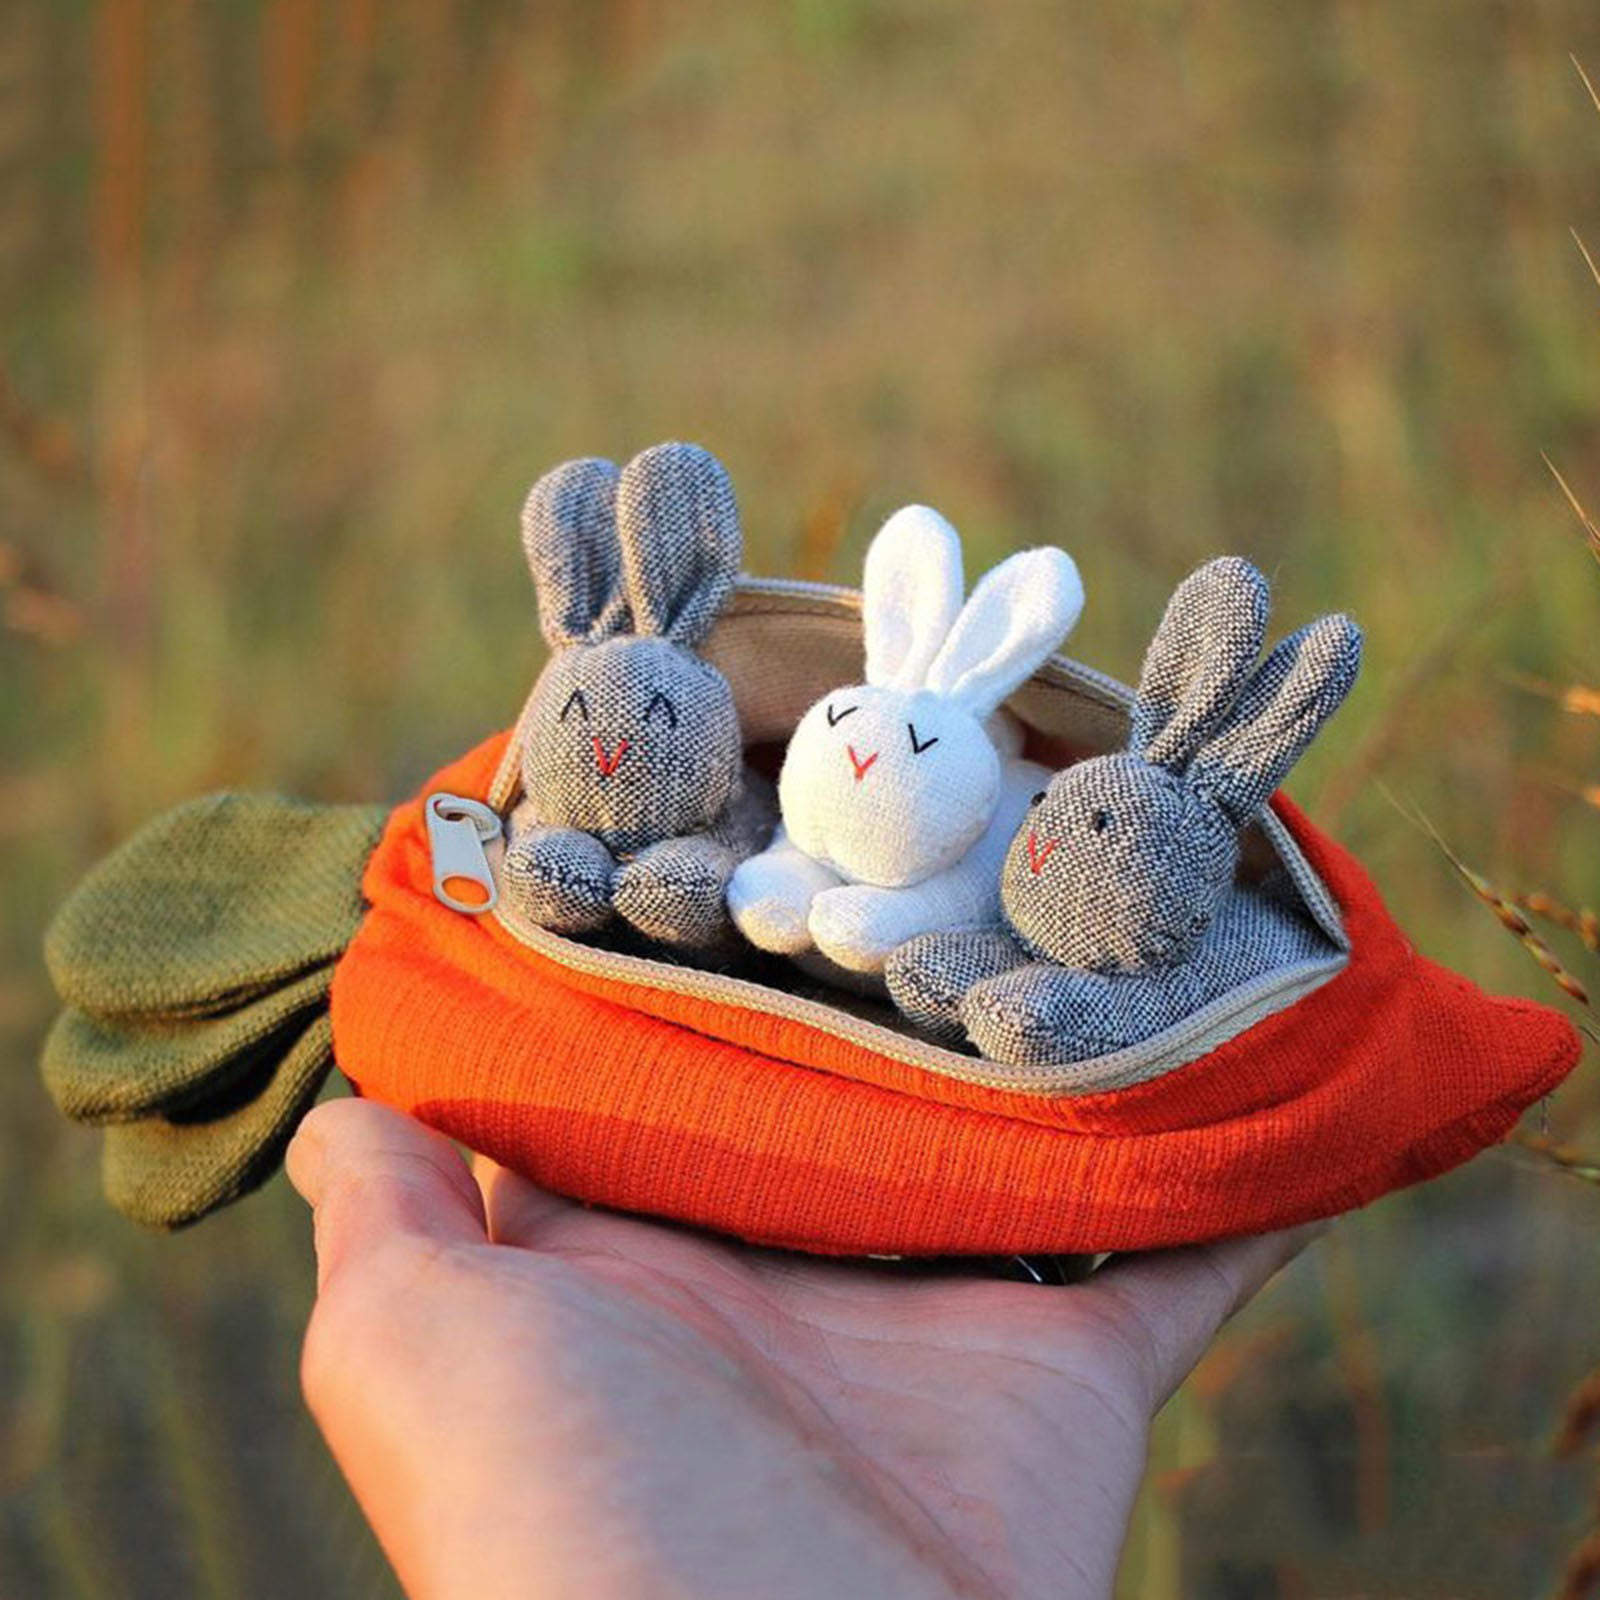 Manfiter Plush Bunny Toys in Carrot Pouch, Three Bunnies in A Carrot Purse, Unzip The Rabbit Doll Toy 3 Bunnies in Carrot Purse, Cute Easter Bunny